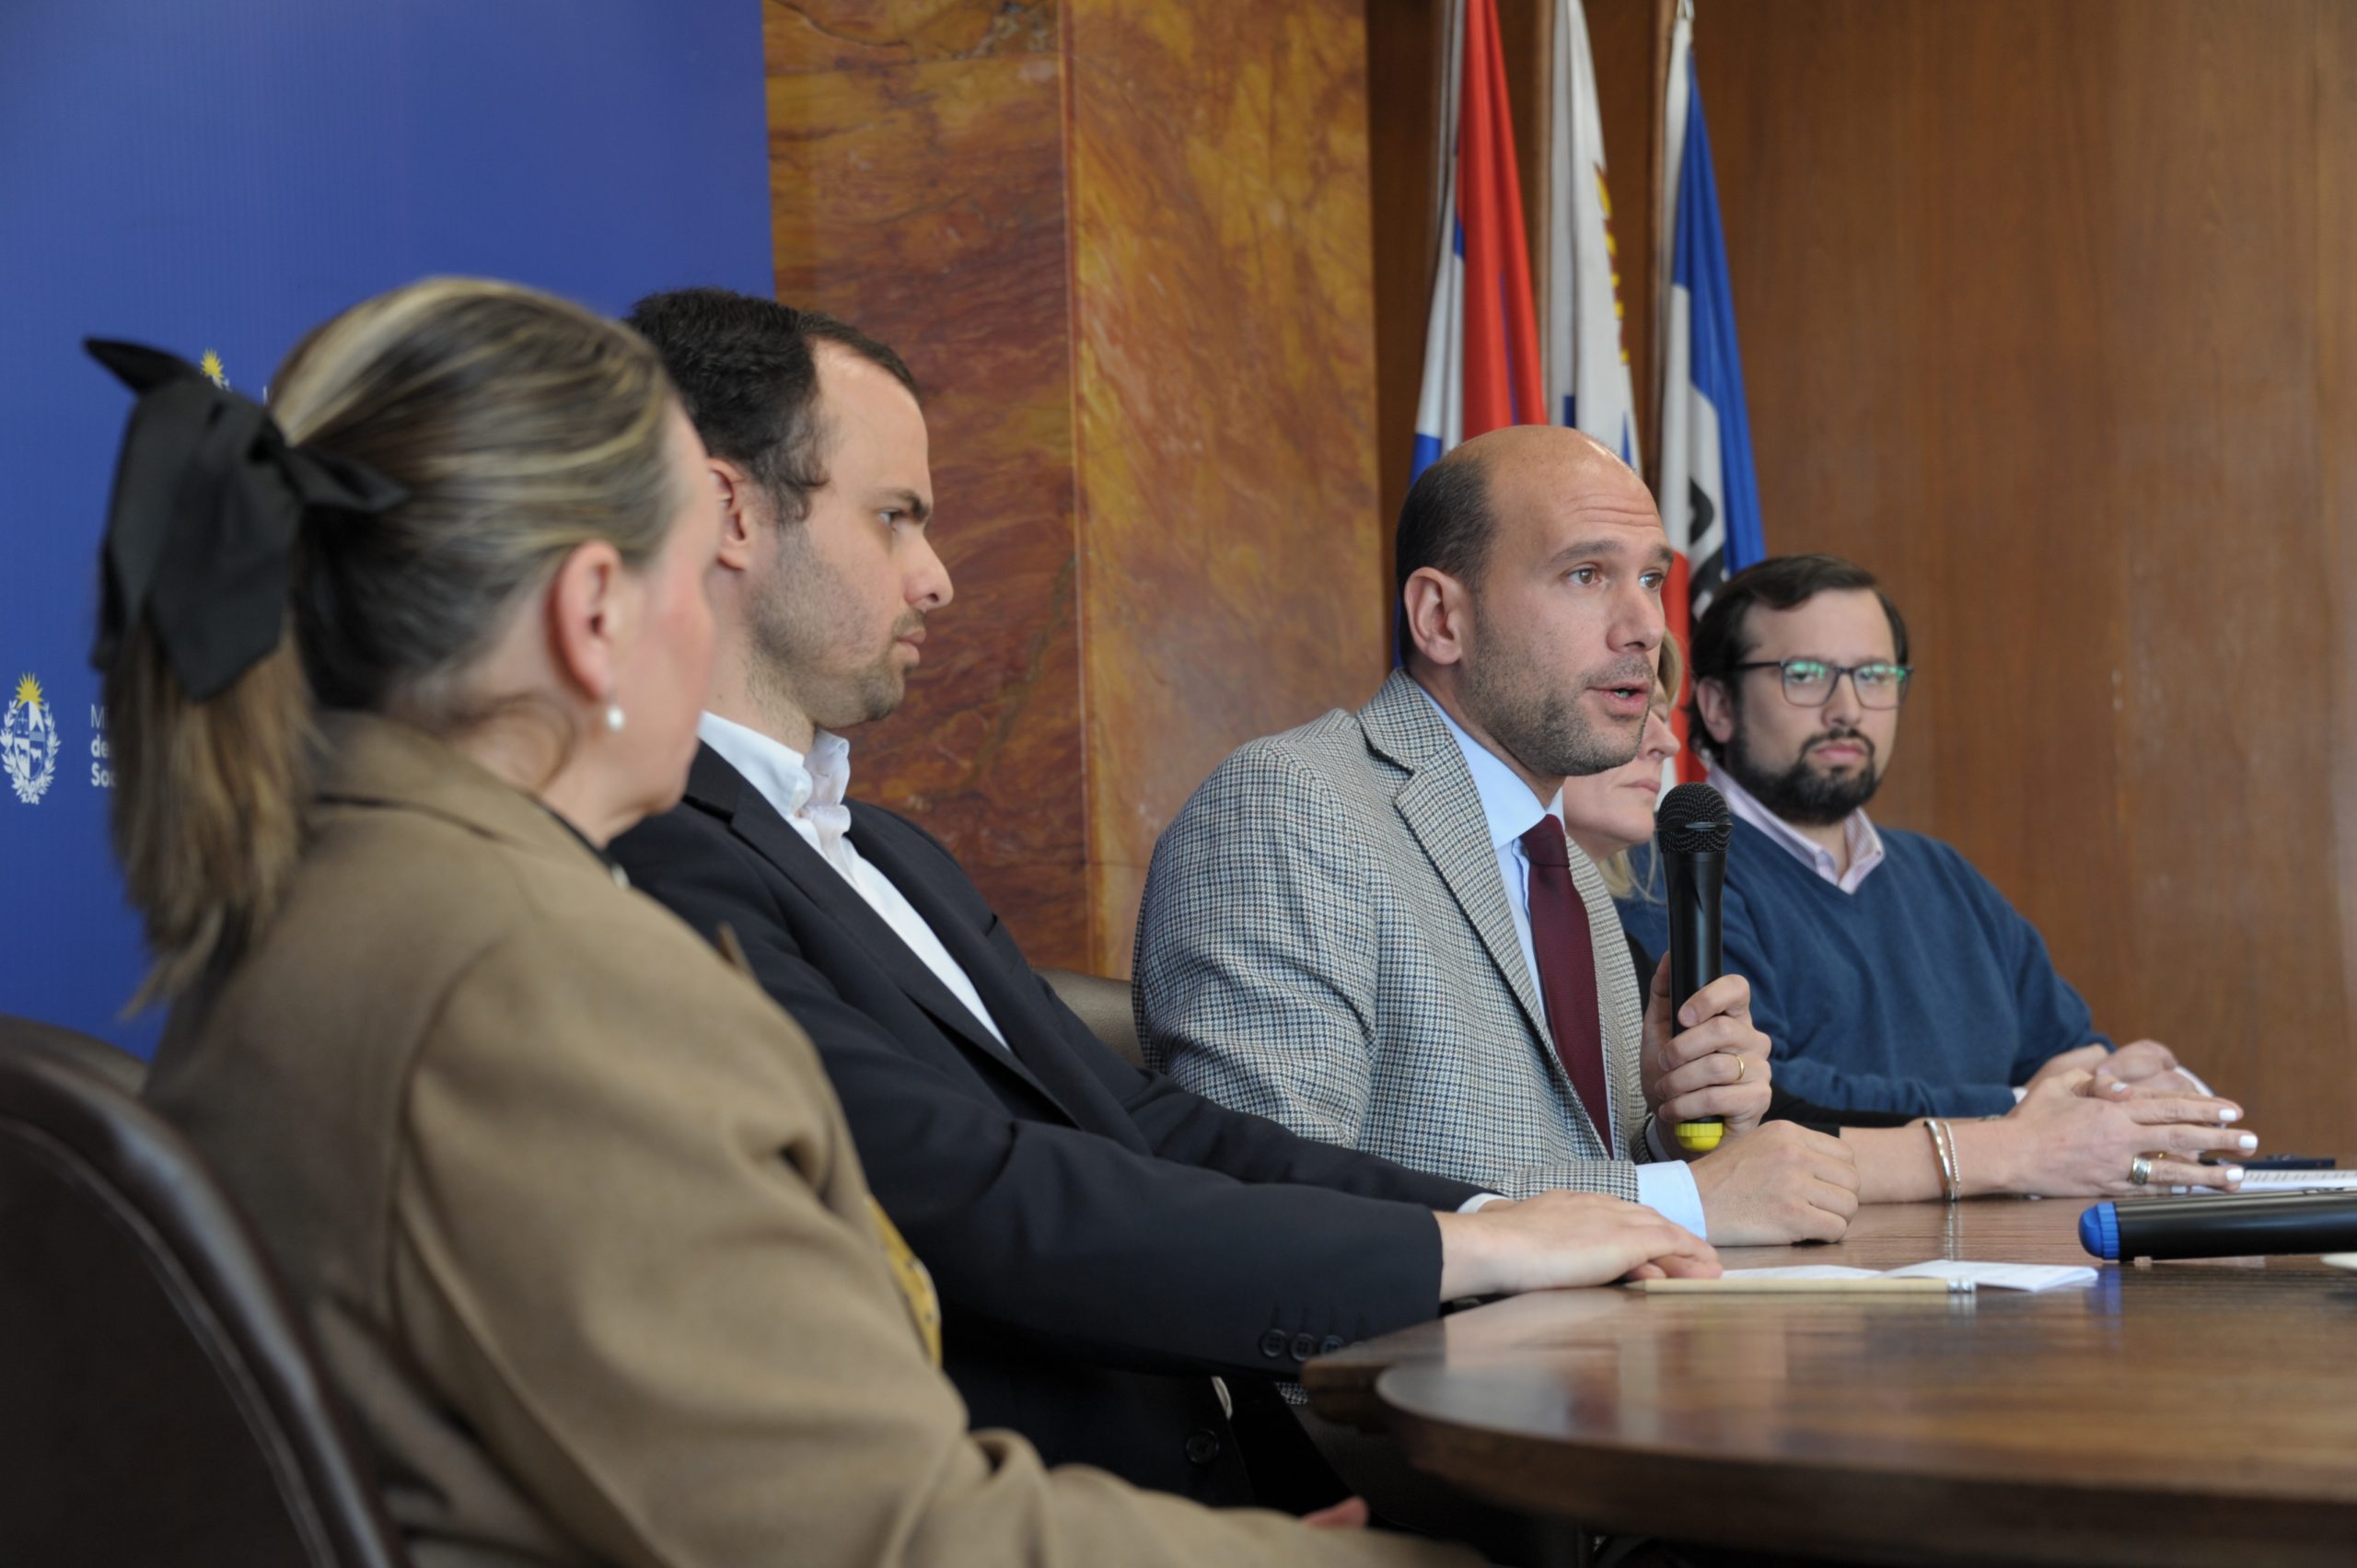 Mides will allocate 150 million pesos to address the problems of homeless people